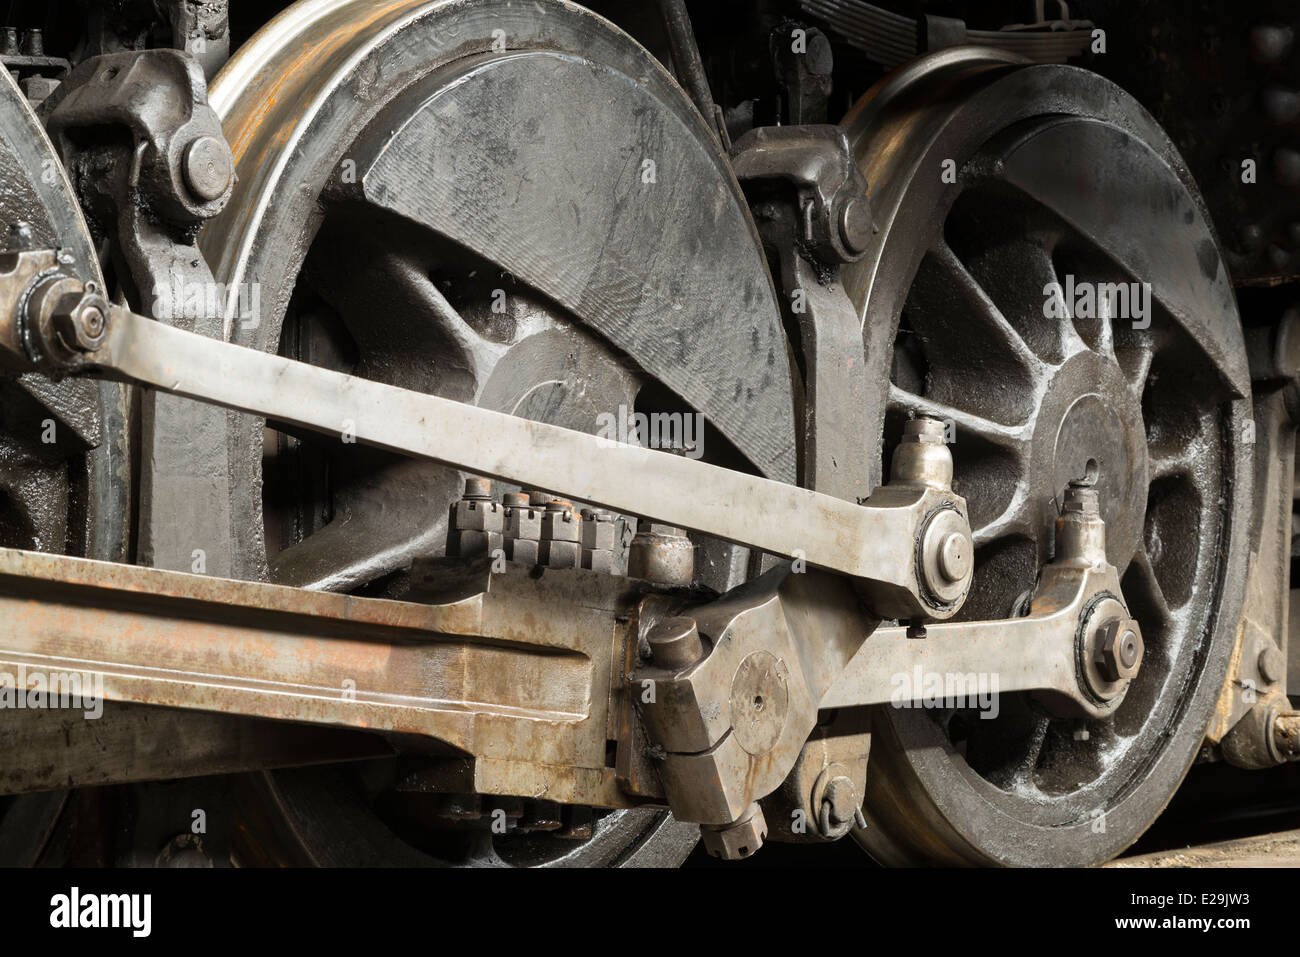 Drive train of a restored steam locomotive engine, Sumpter Valley Railroad, Eastern Oregon. Stock Photo